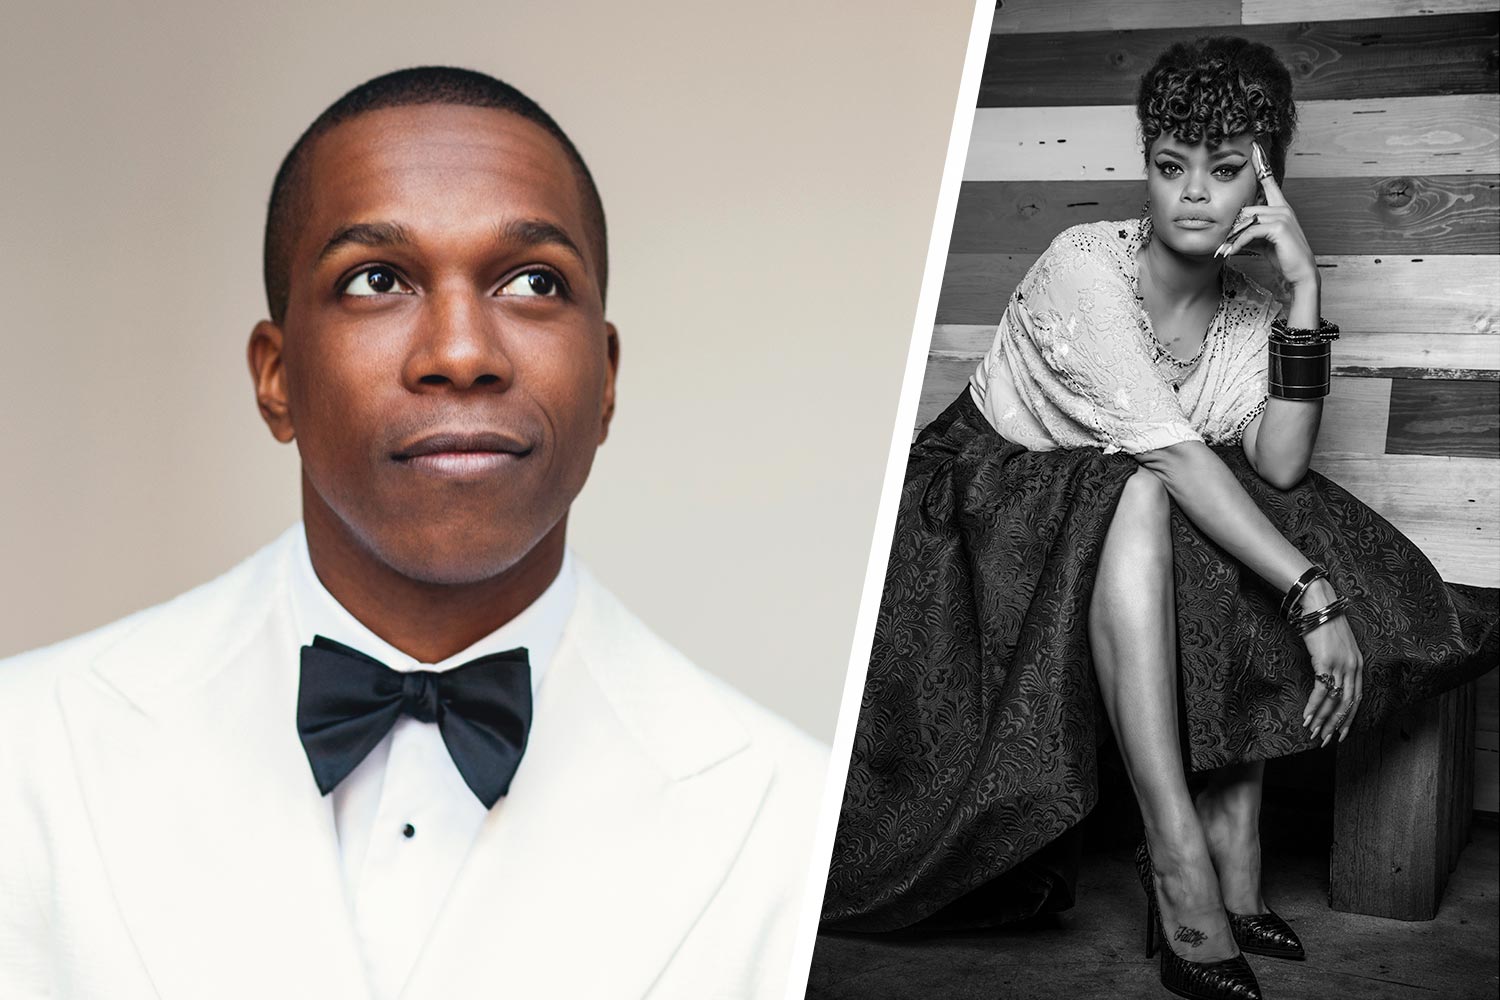 Headshots left to right: Leslie Odom and Andra Day